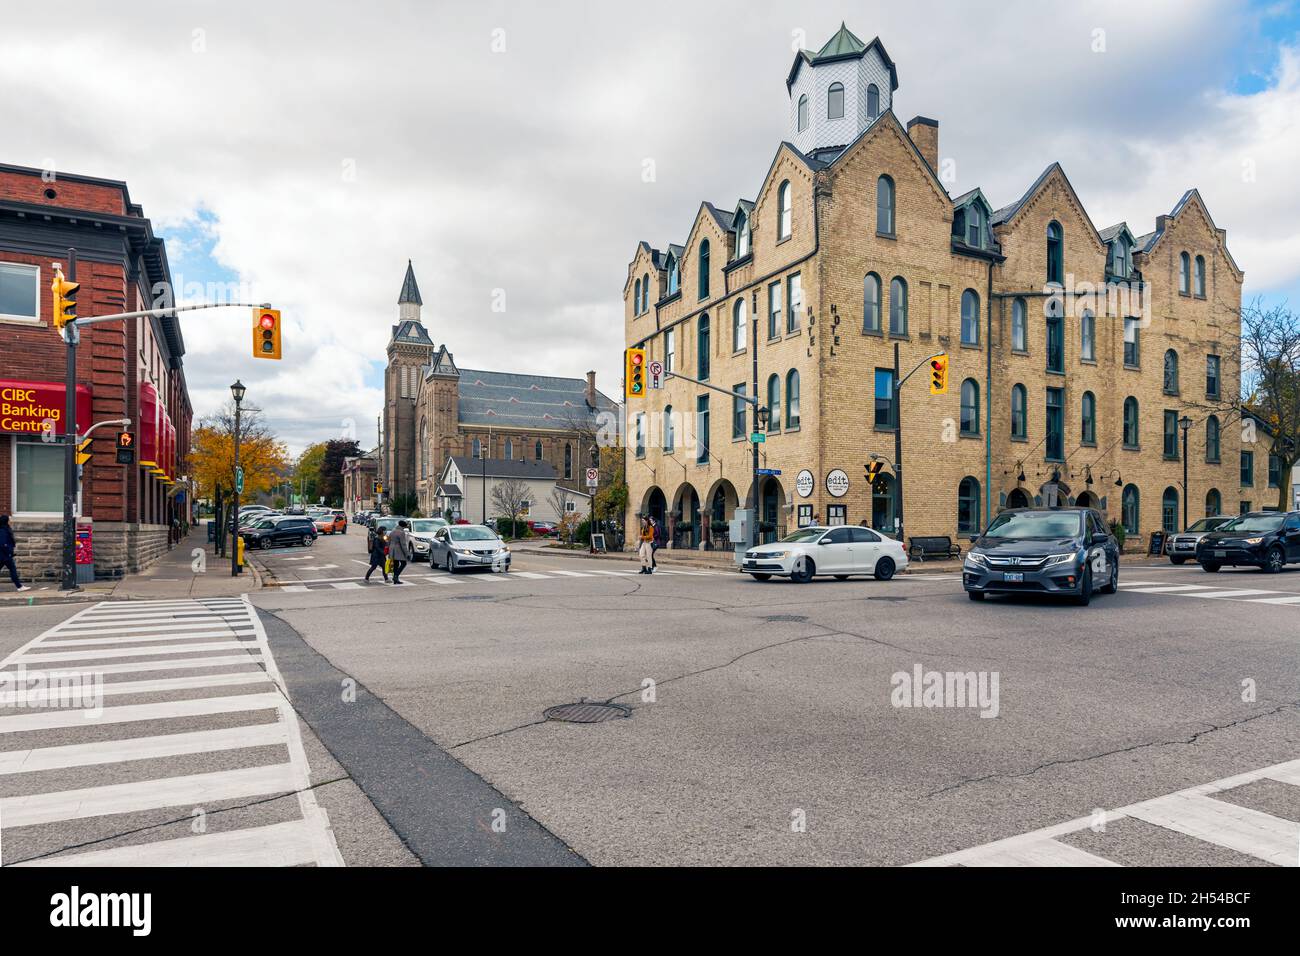 Paris, Ontario, Canada - October 24, 2020: View at the intersection of William Street and Grand River N in Paris Ontario, Canada. Stock Photo